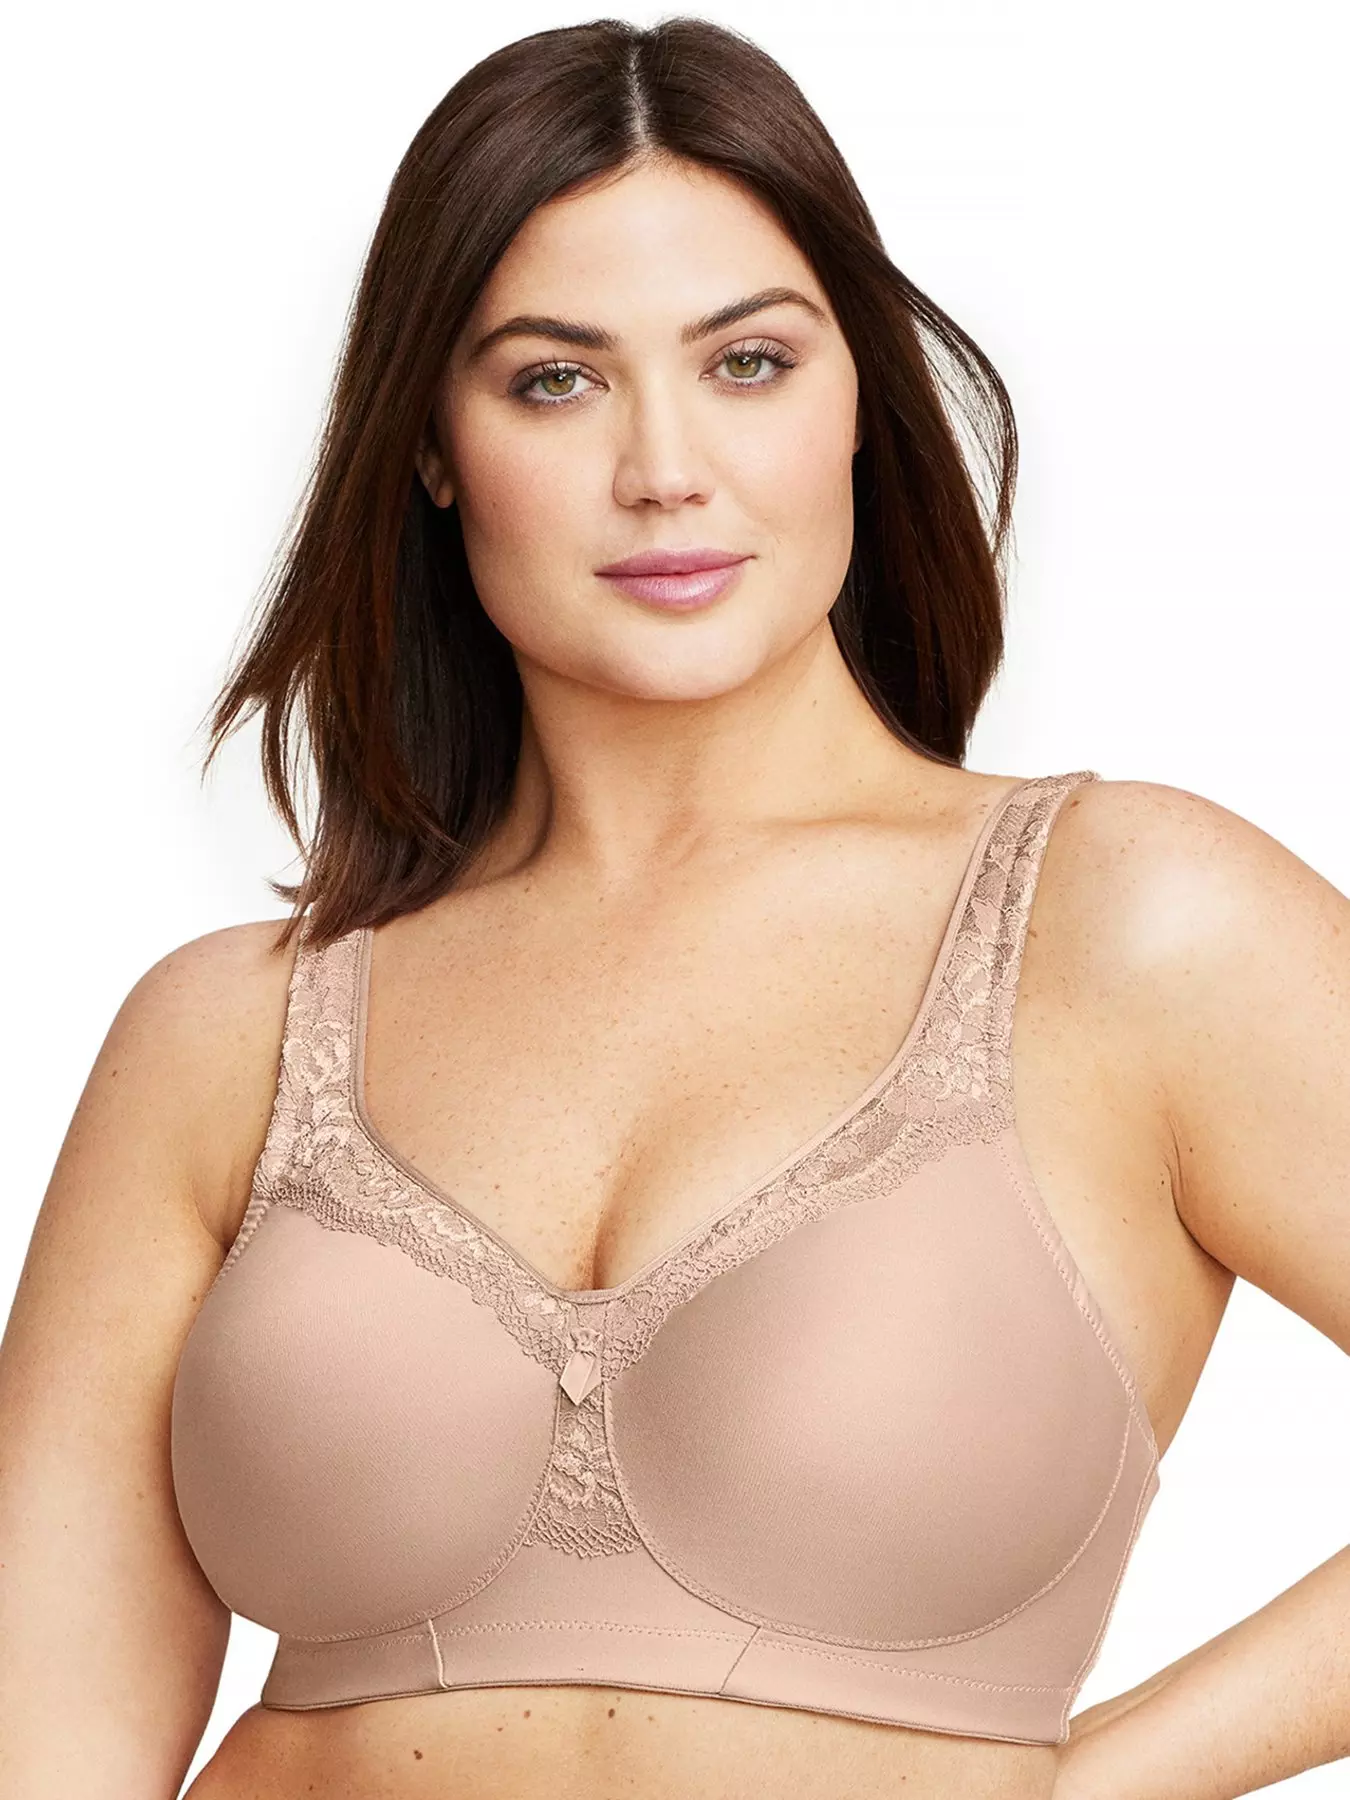 LEADING LADY Nude Molded Soft Cup Bra, US 36G, UK 36F, NWOT